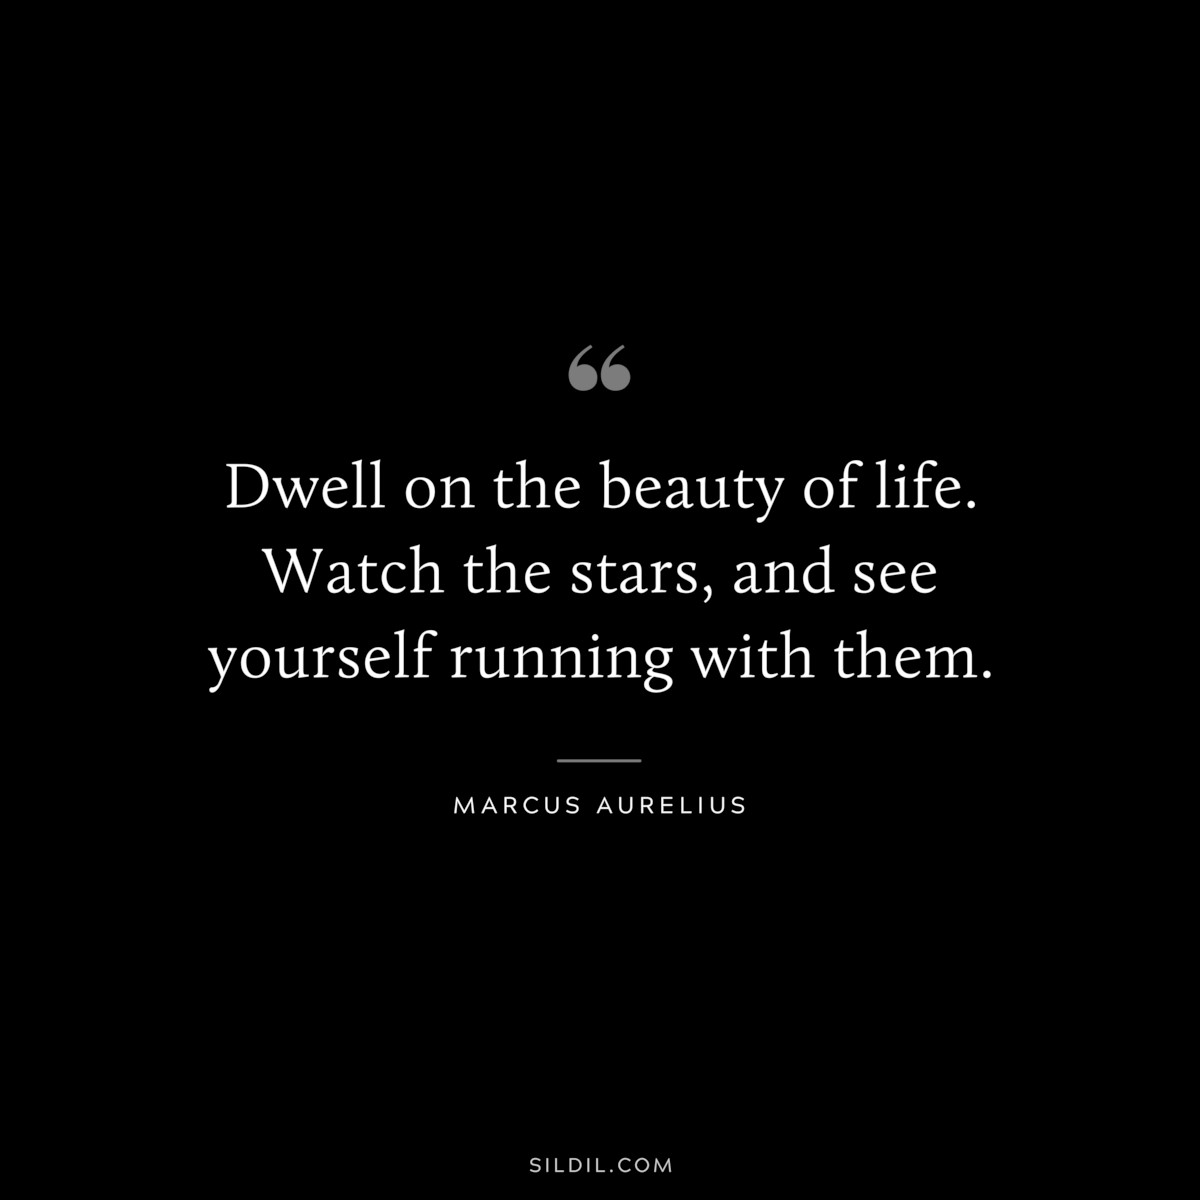 Dwell on the beauty of life. Watch the stars, and see yourself running with them. ― Marcus Aurelius